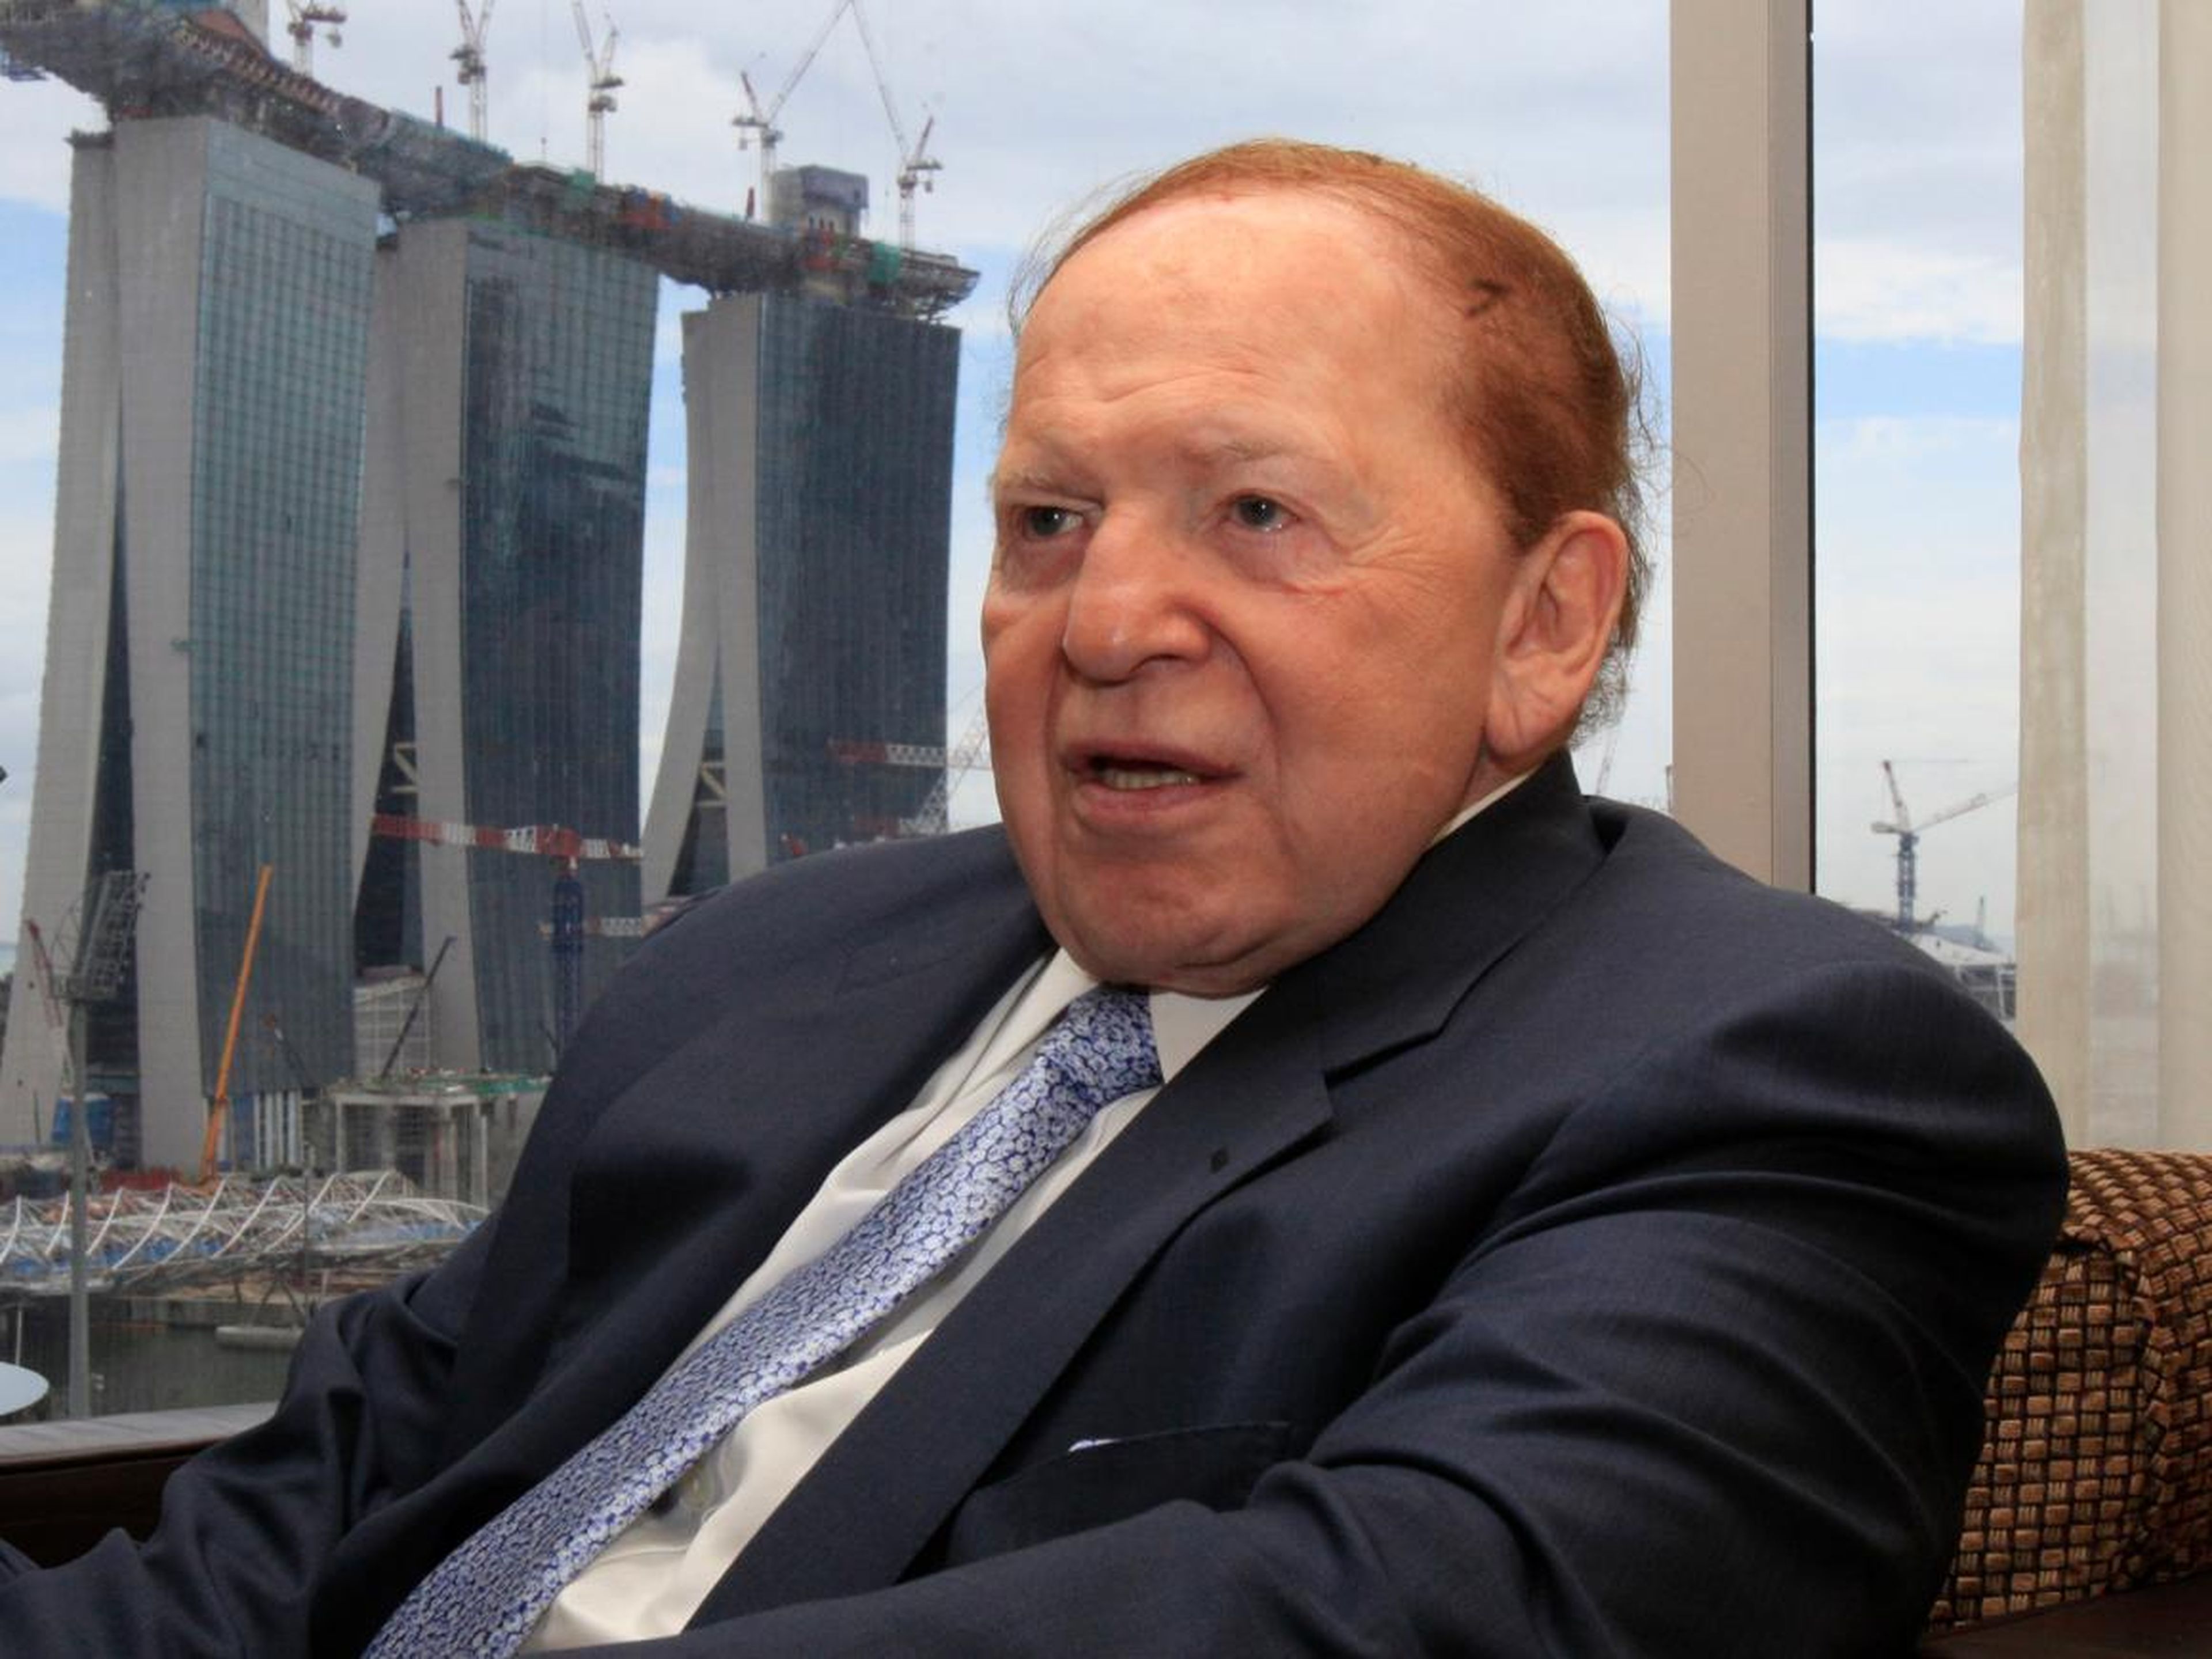 "I never thought about becoming wealthy. It never crossed my mind. What really motivated me was to try to accomplish something." — Sheldon Adelson, chairman and CEO of Las Vegas Sands Corporation